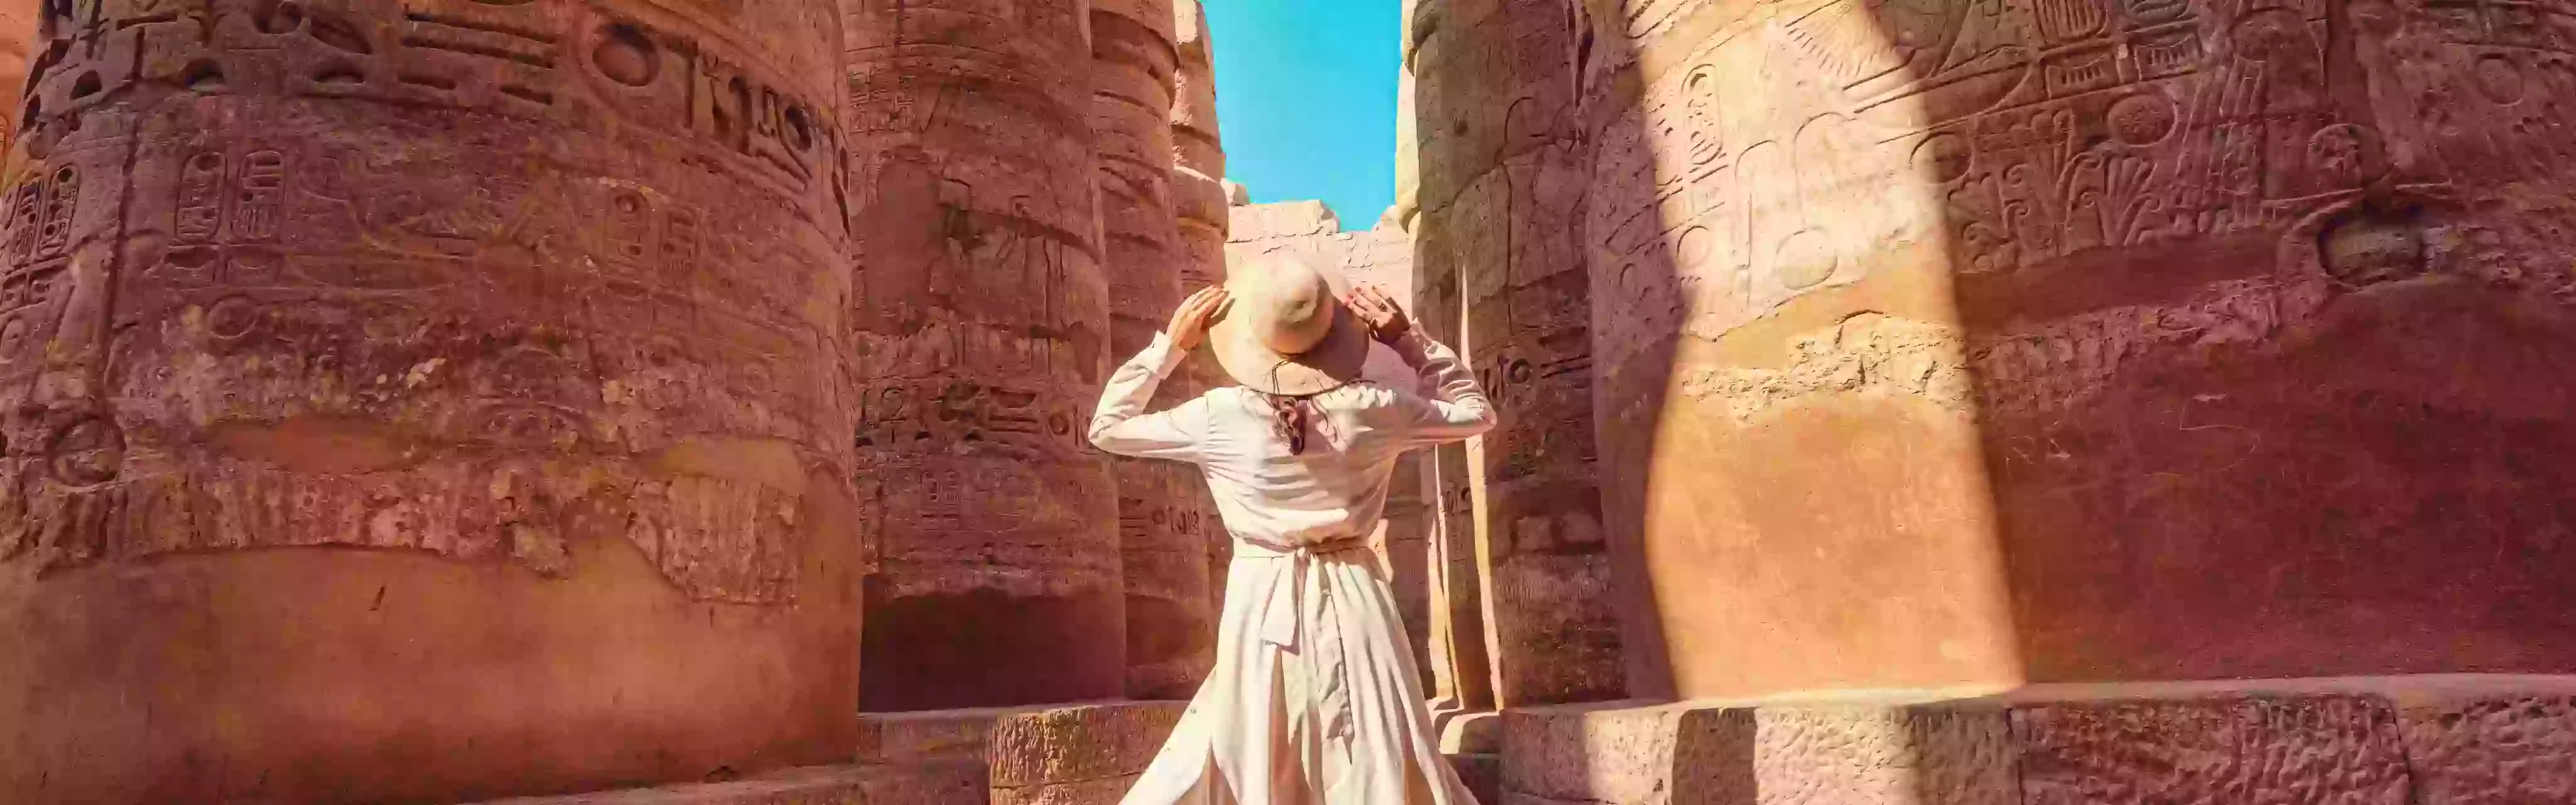 people-love-to-visit-Egypt-ask-aladdin